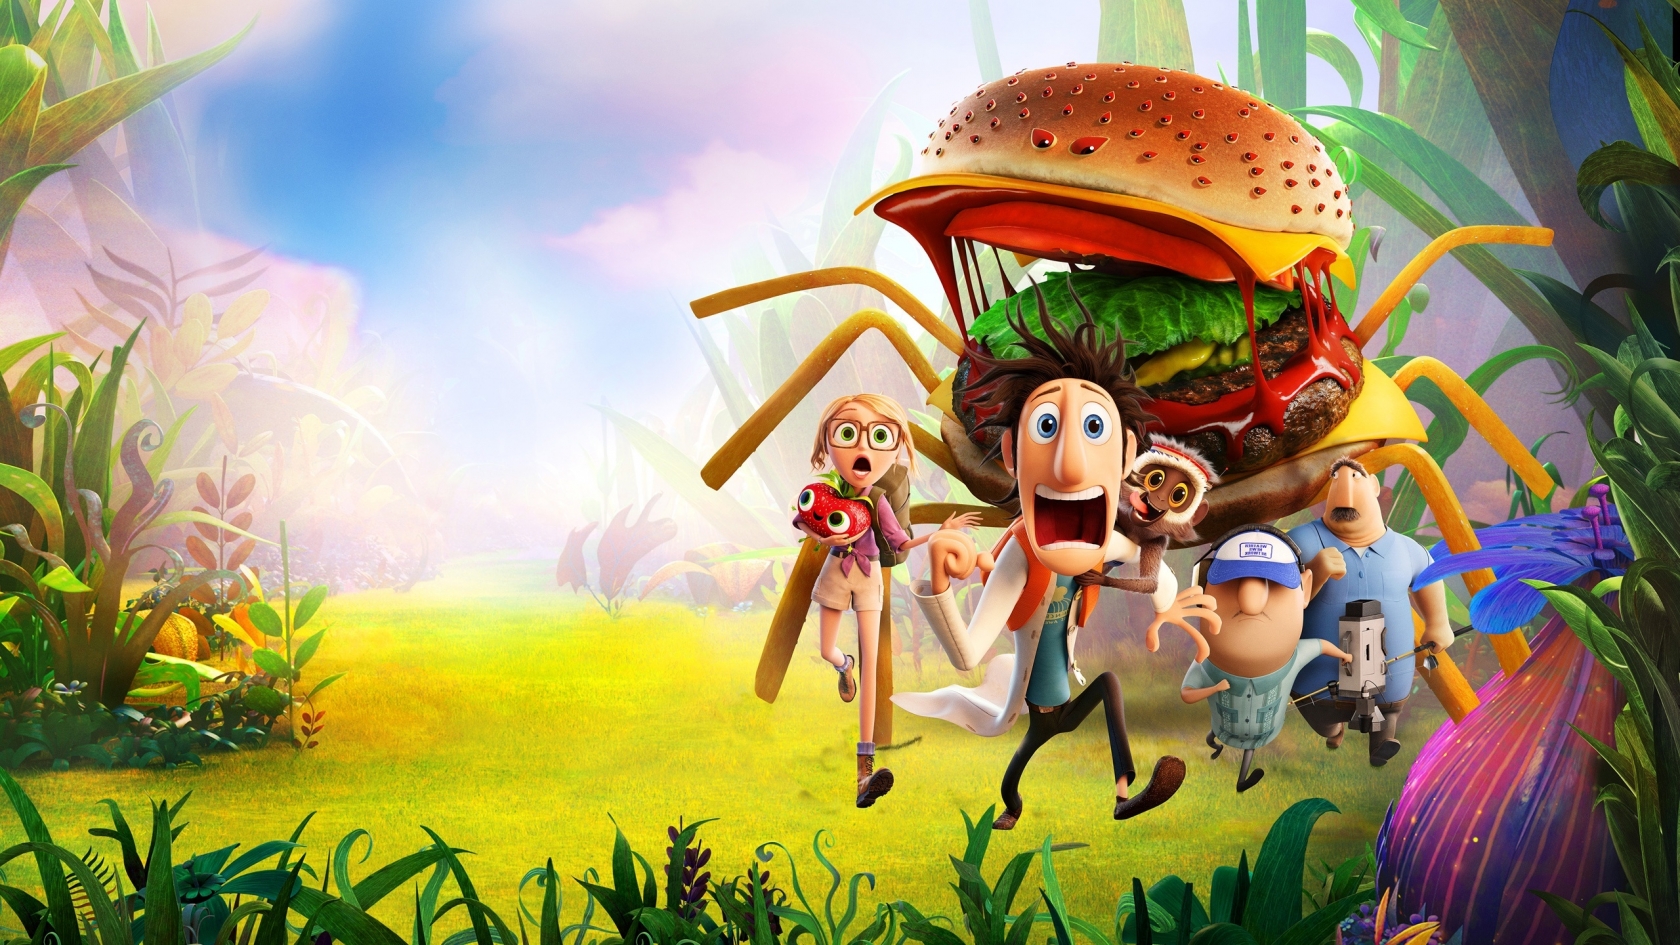 Cloudy with a chance of Meatballs for 1680 x 945 HDTV resolution